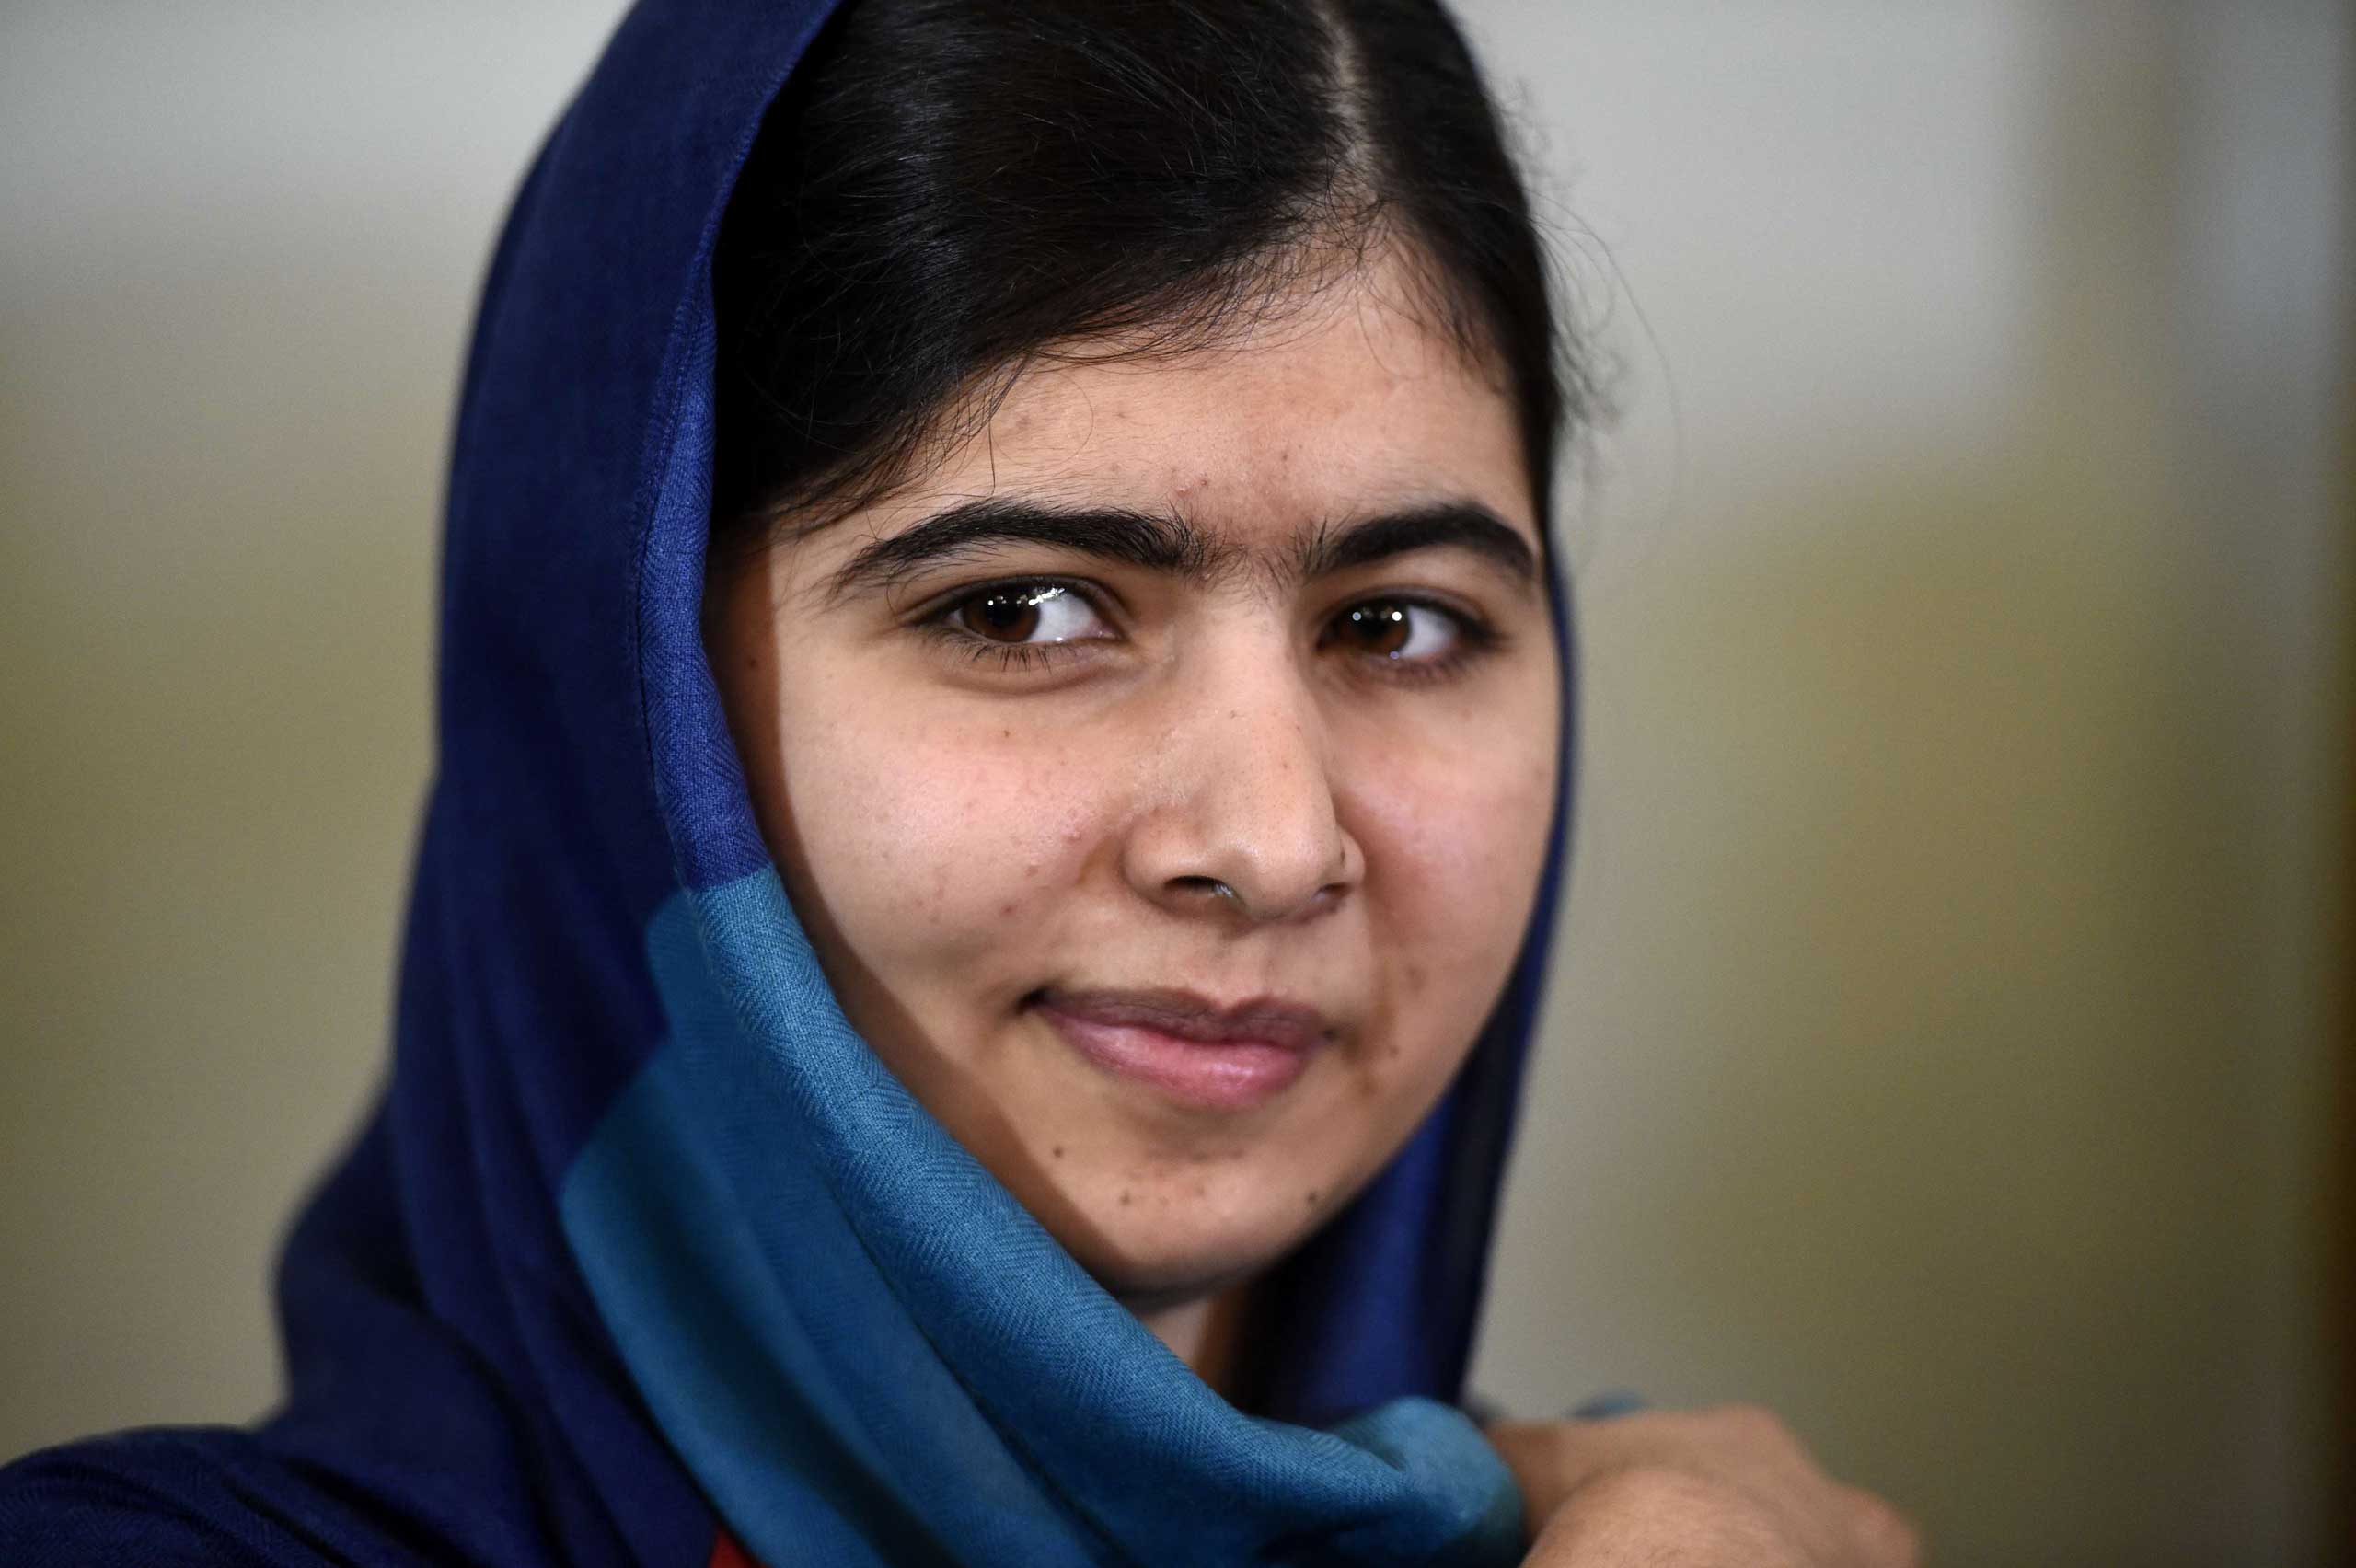 Nobel Peace Prize laureate Malala Yousafzai attends a press conference on Dec. 9, 2014 at the Norwegian Nobel Institute in Oslo ahead of the ceremony to present her with the award. (Odd Andersen—AFP/Getty Images)